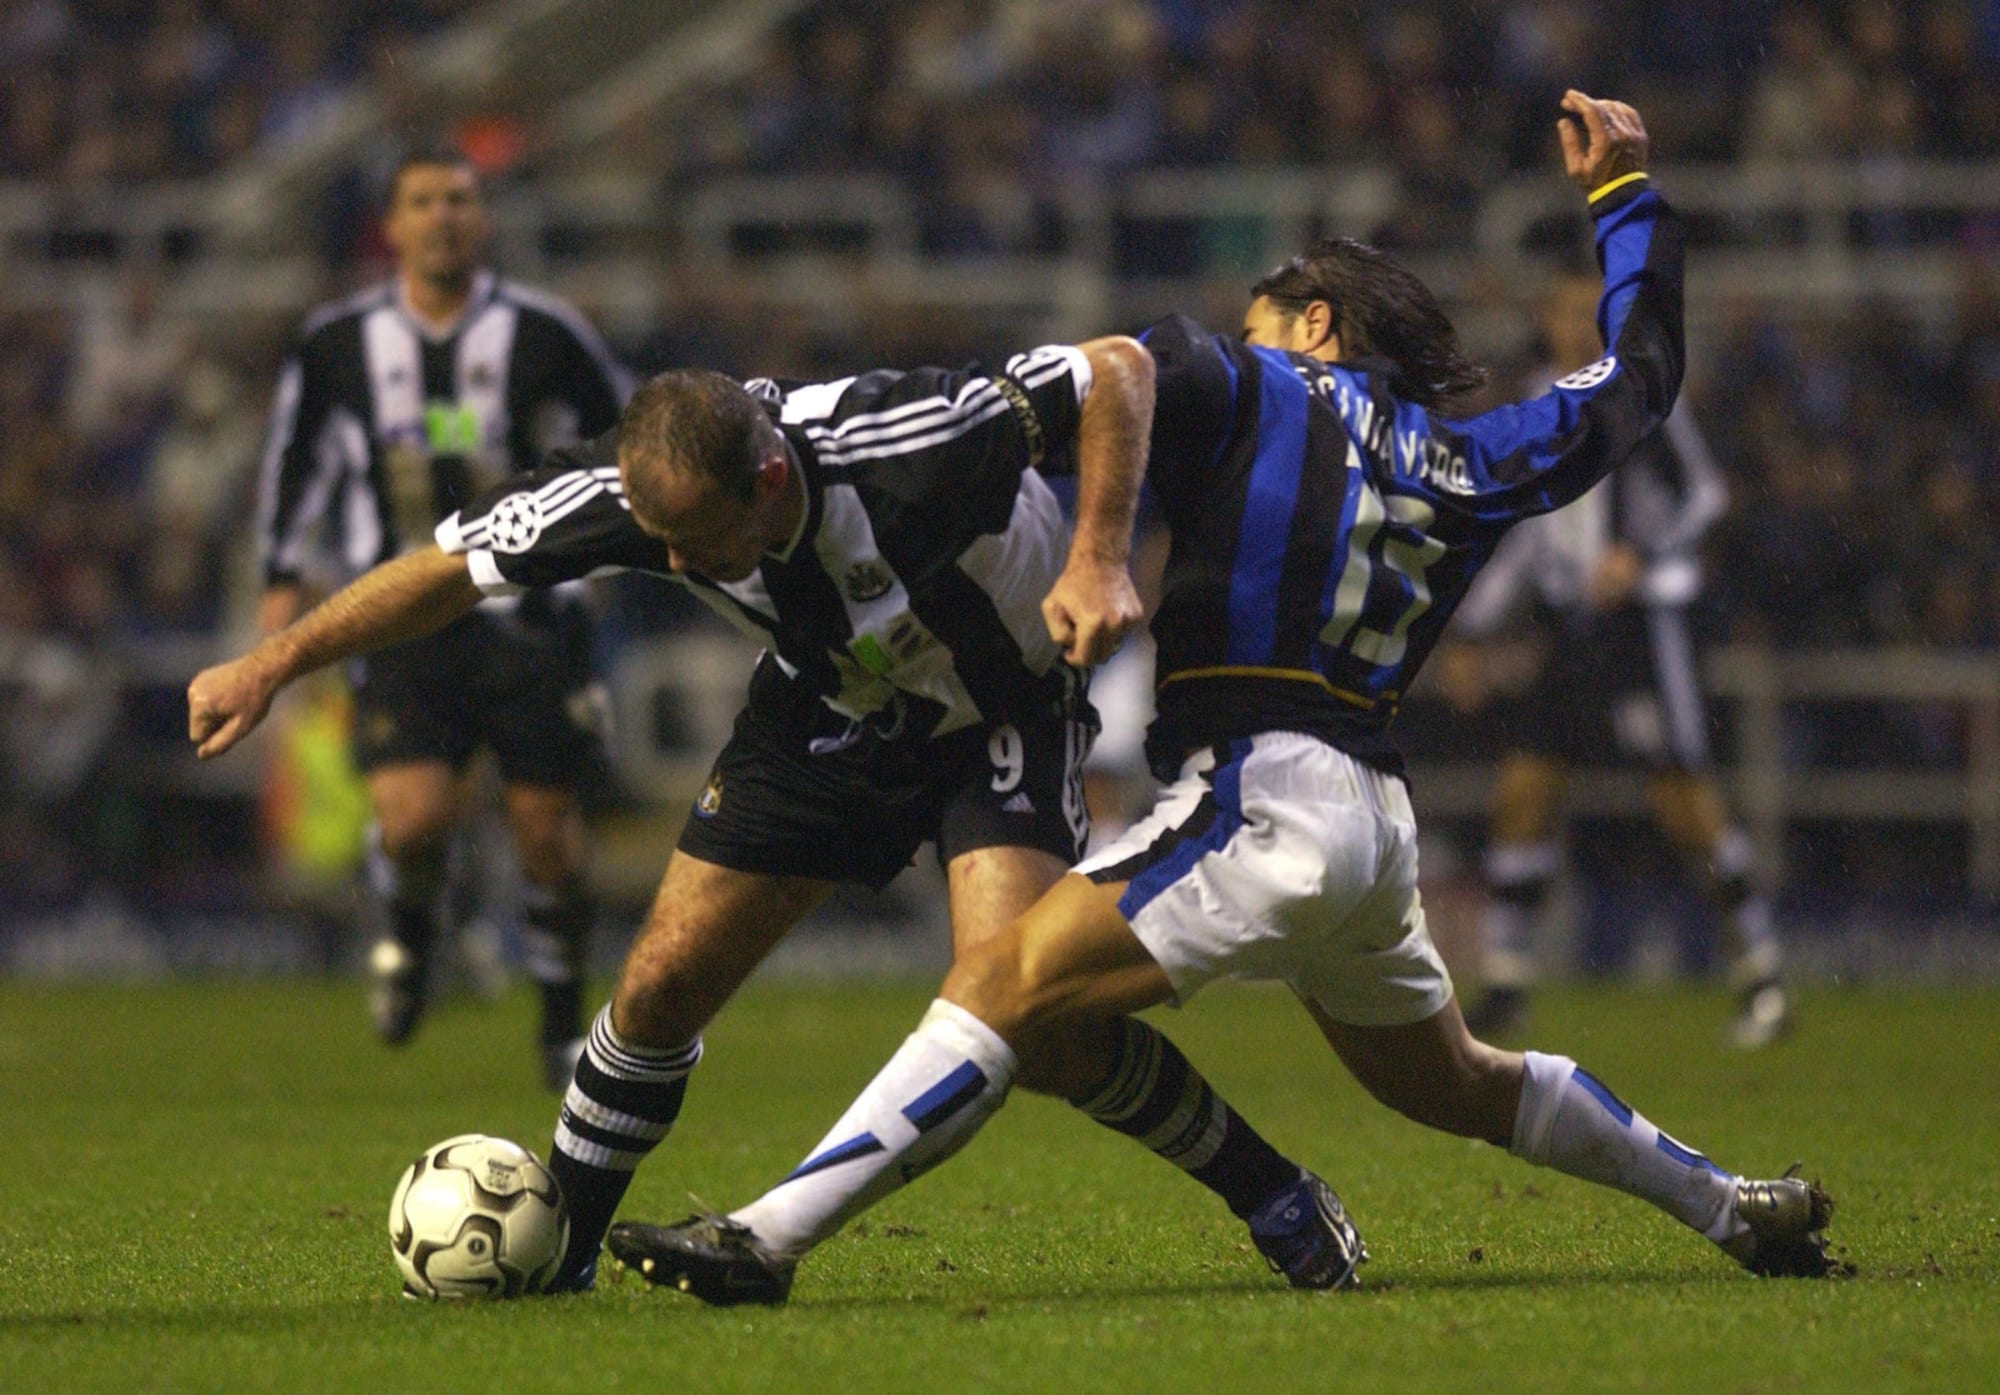 Looking back at Shearer's 02-03 Champions League run with Newcastle